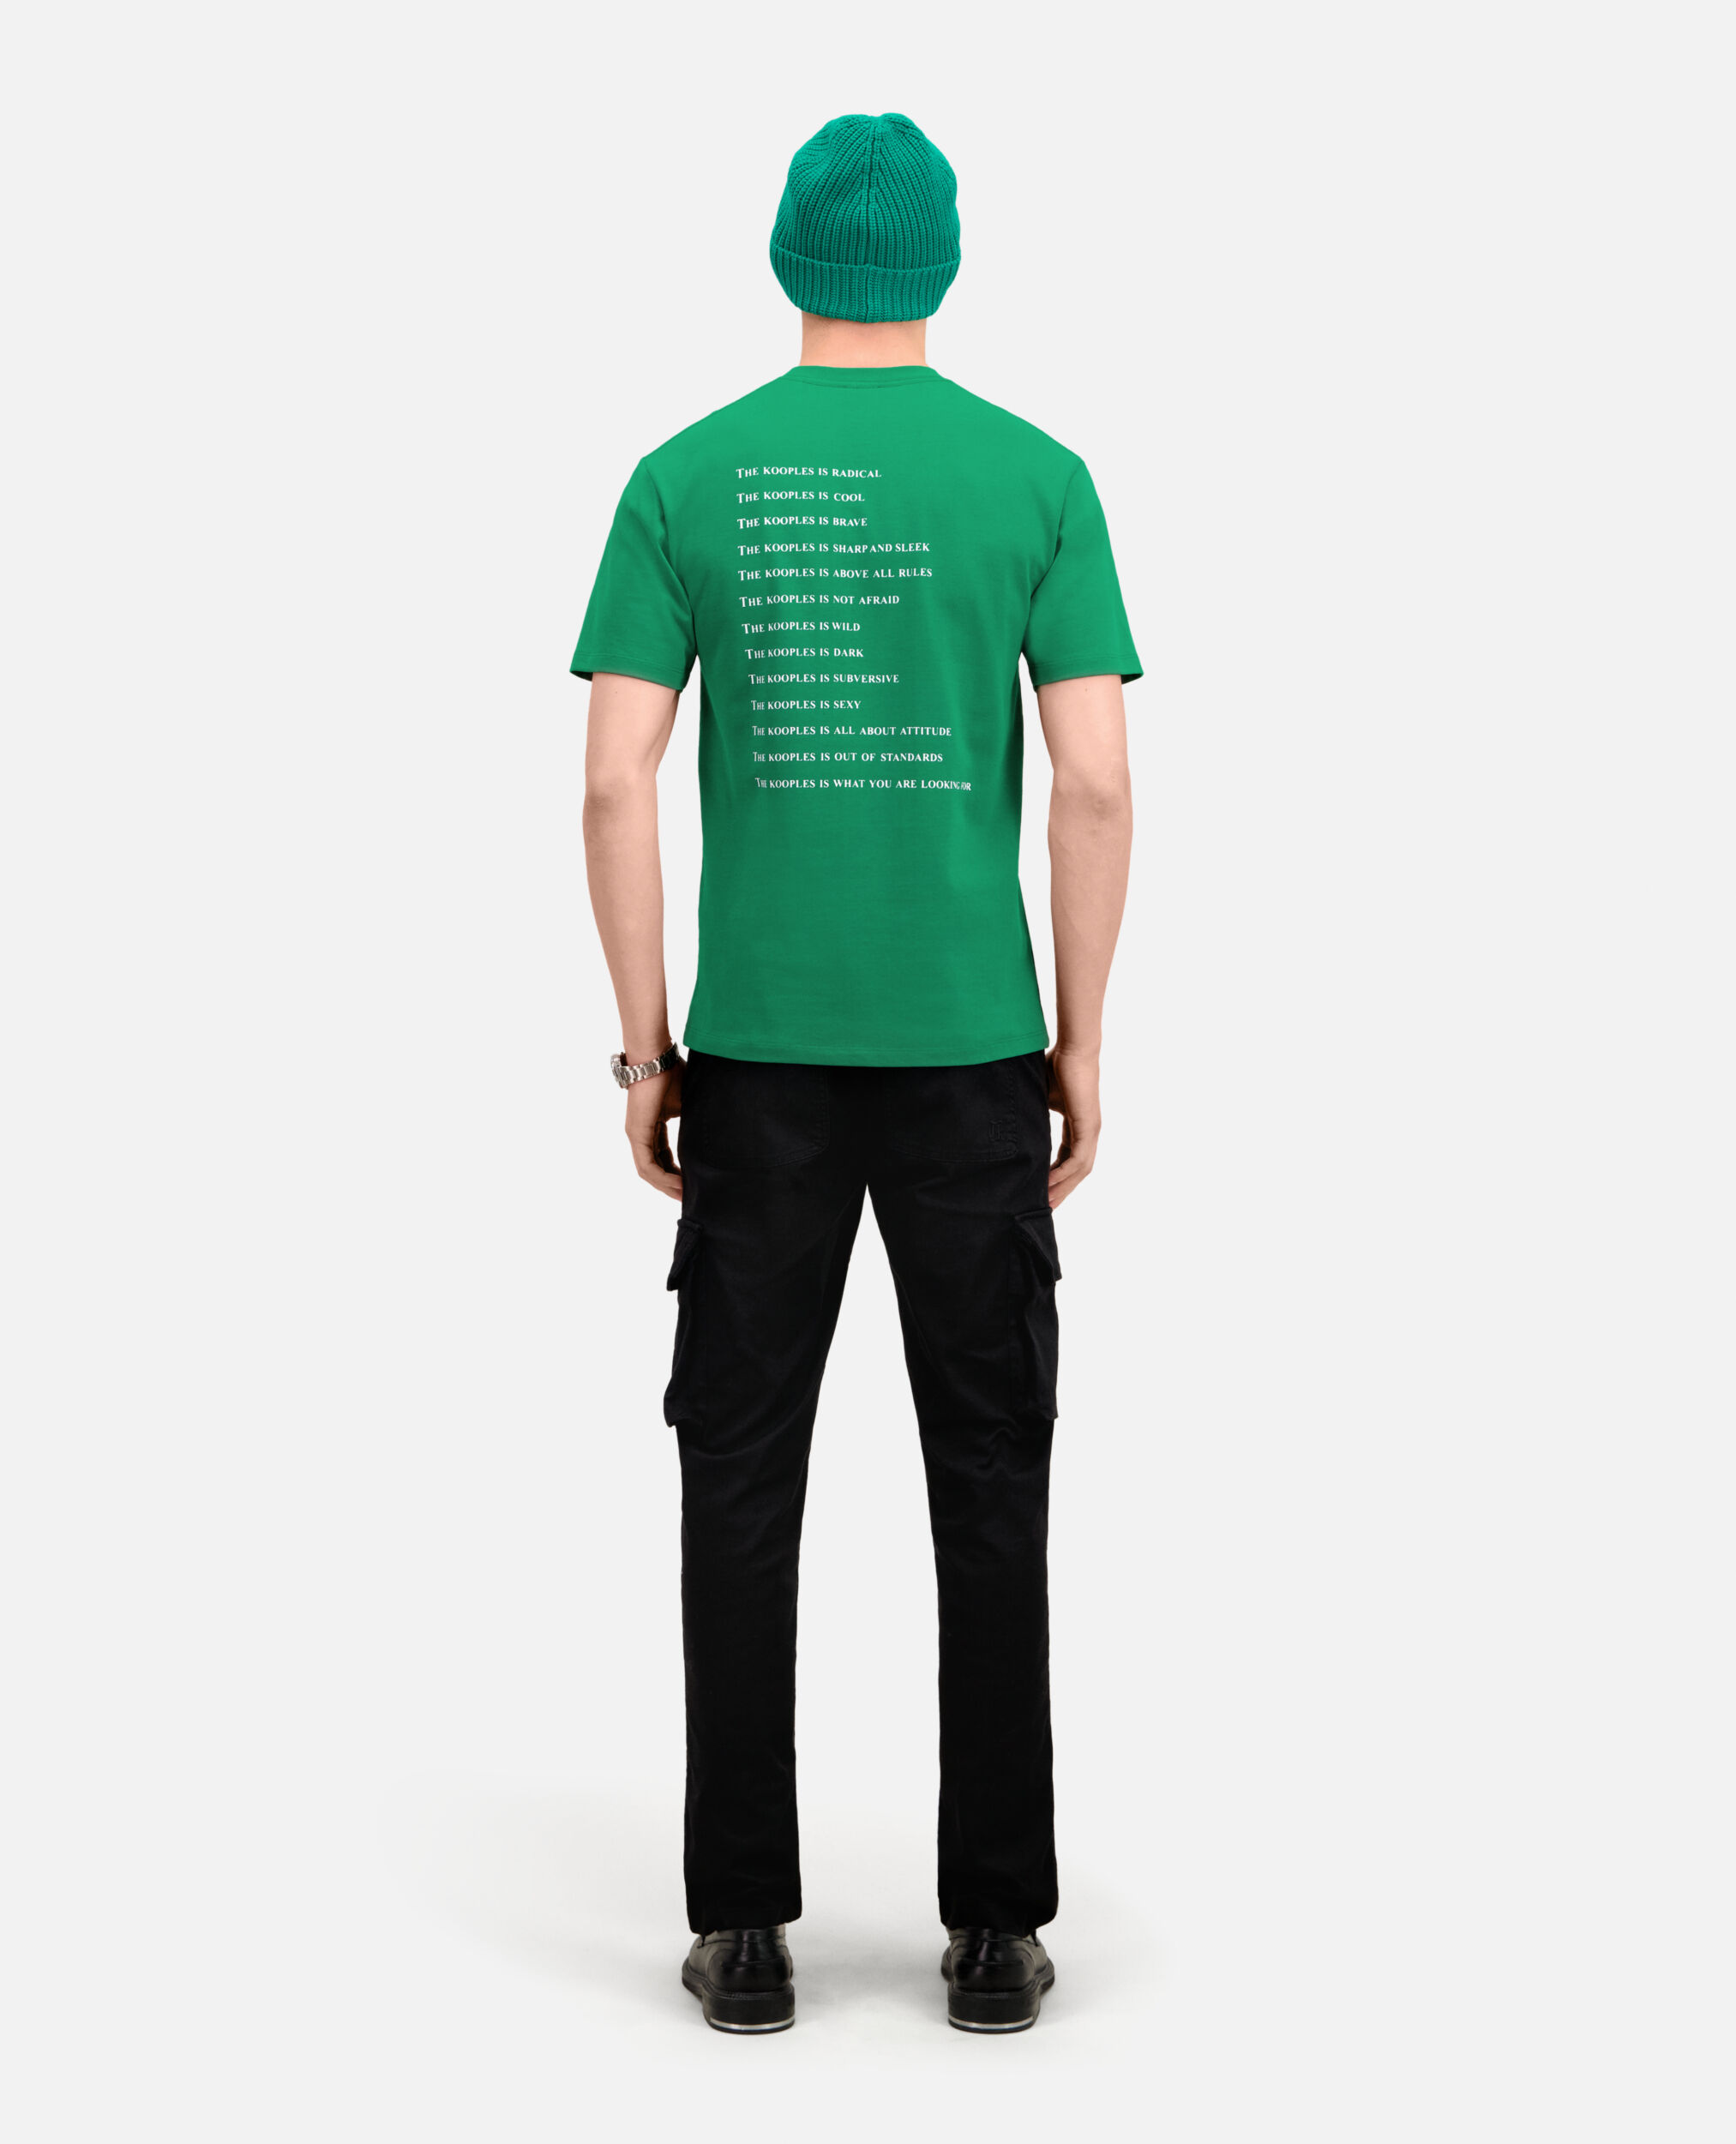 Grünes T-Shirt Herren „What is“, FOREST, hi-res image number null